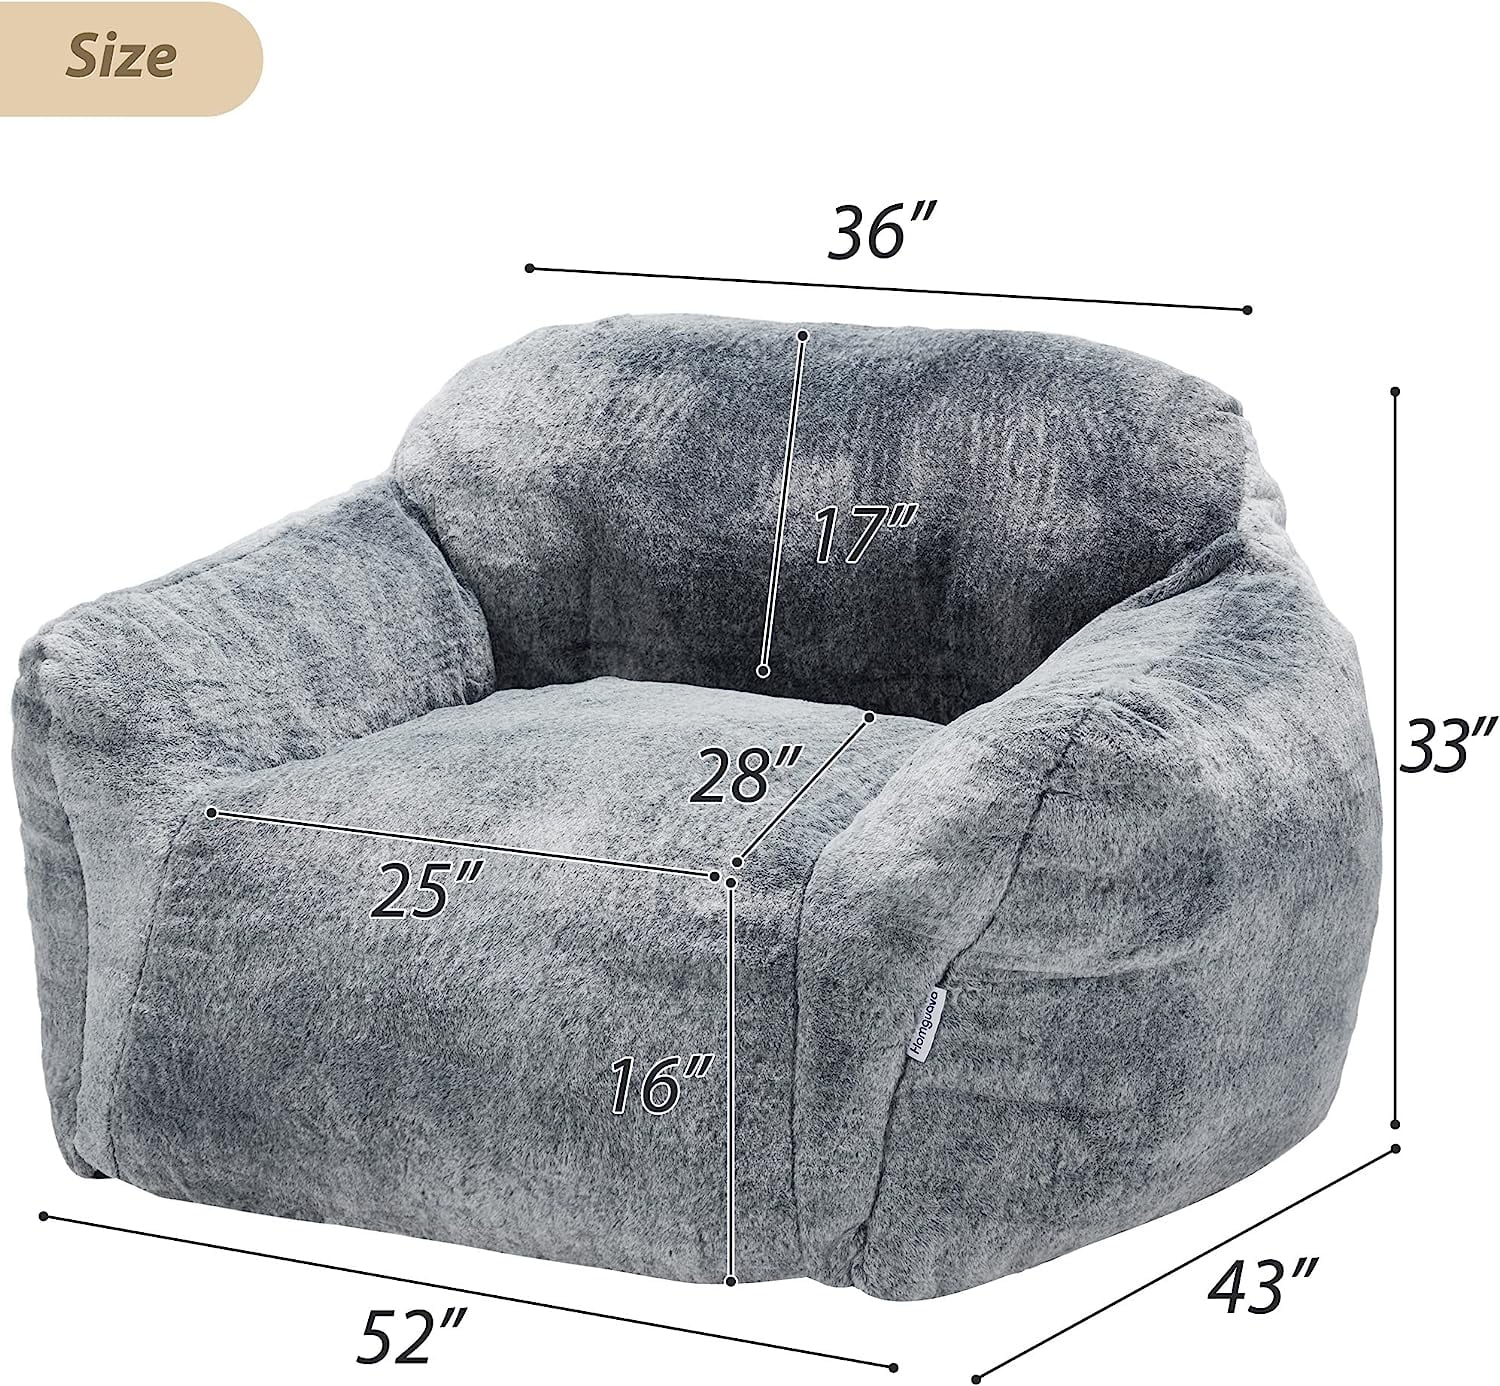 Homguava Bean Bag Chair: 4' Bean Bags with Memory Foam Filled, Large  Beanbag Chairs Soft Sofa with Dutch Velet Cover(Grey, 4FT)